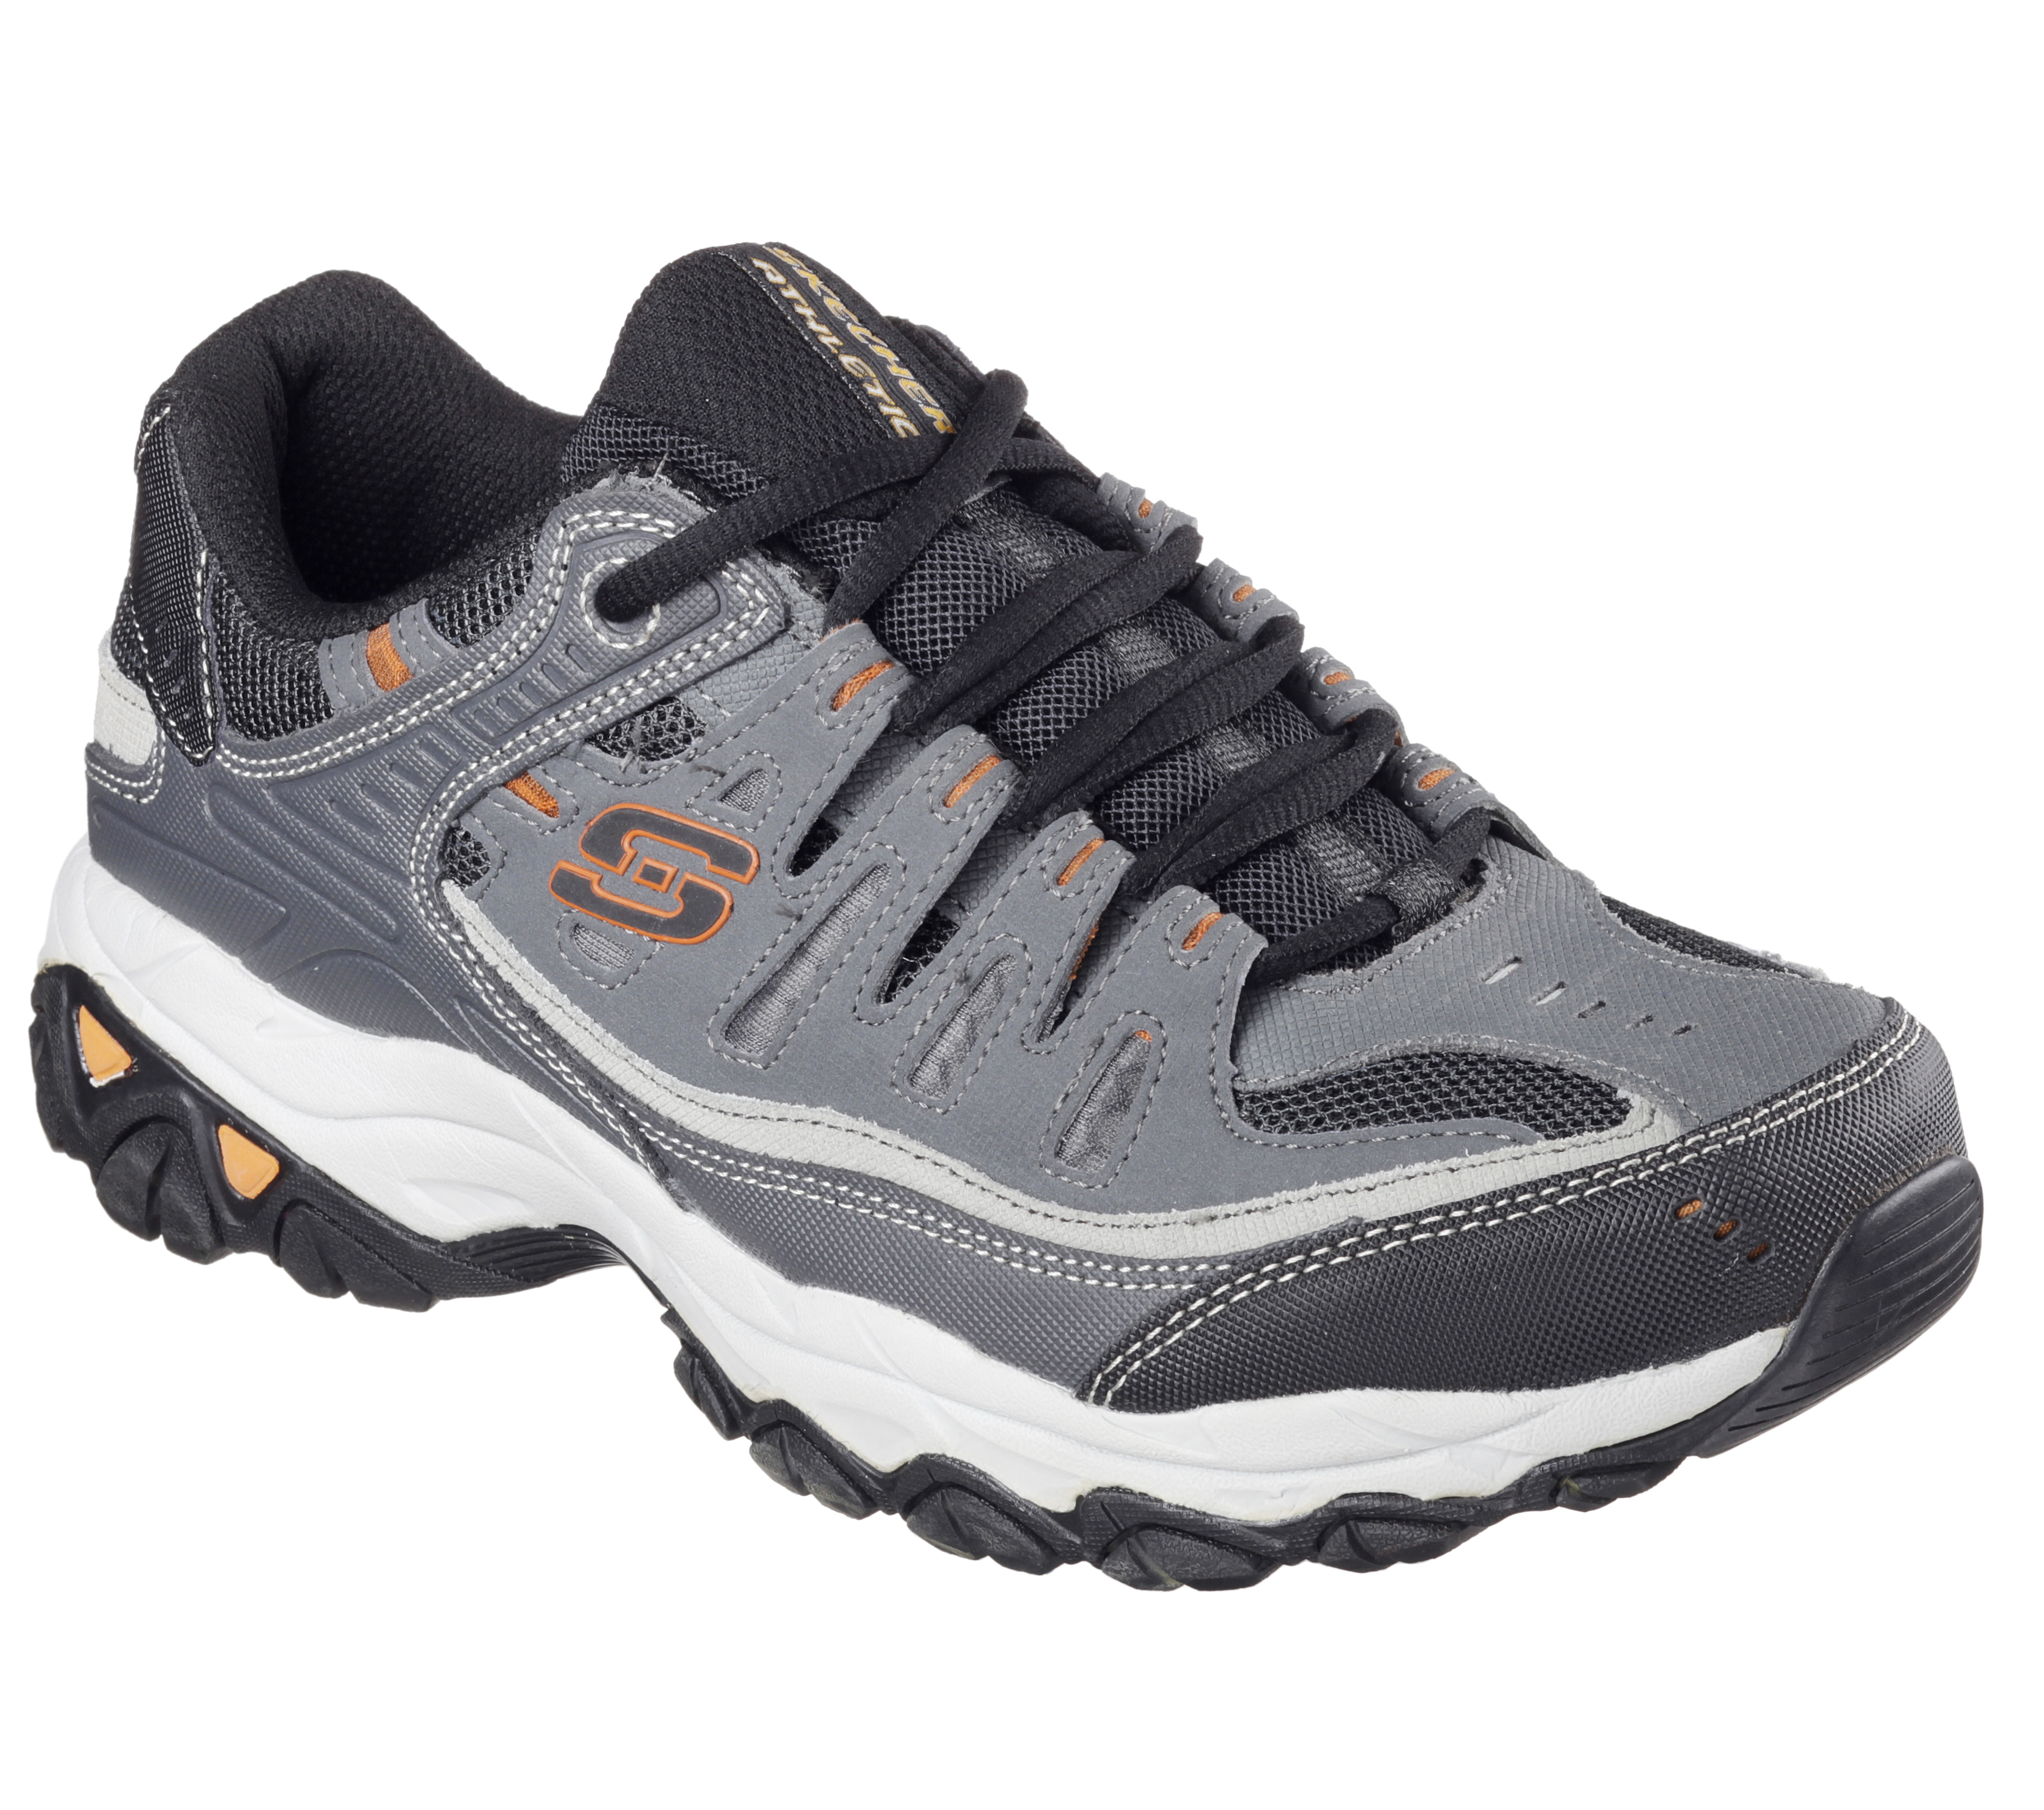 skechers charcoal boots